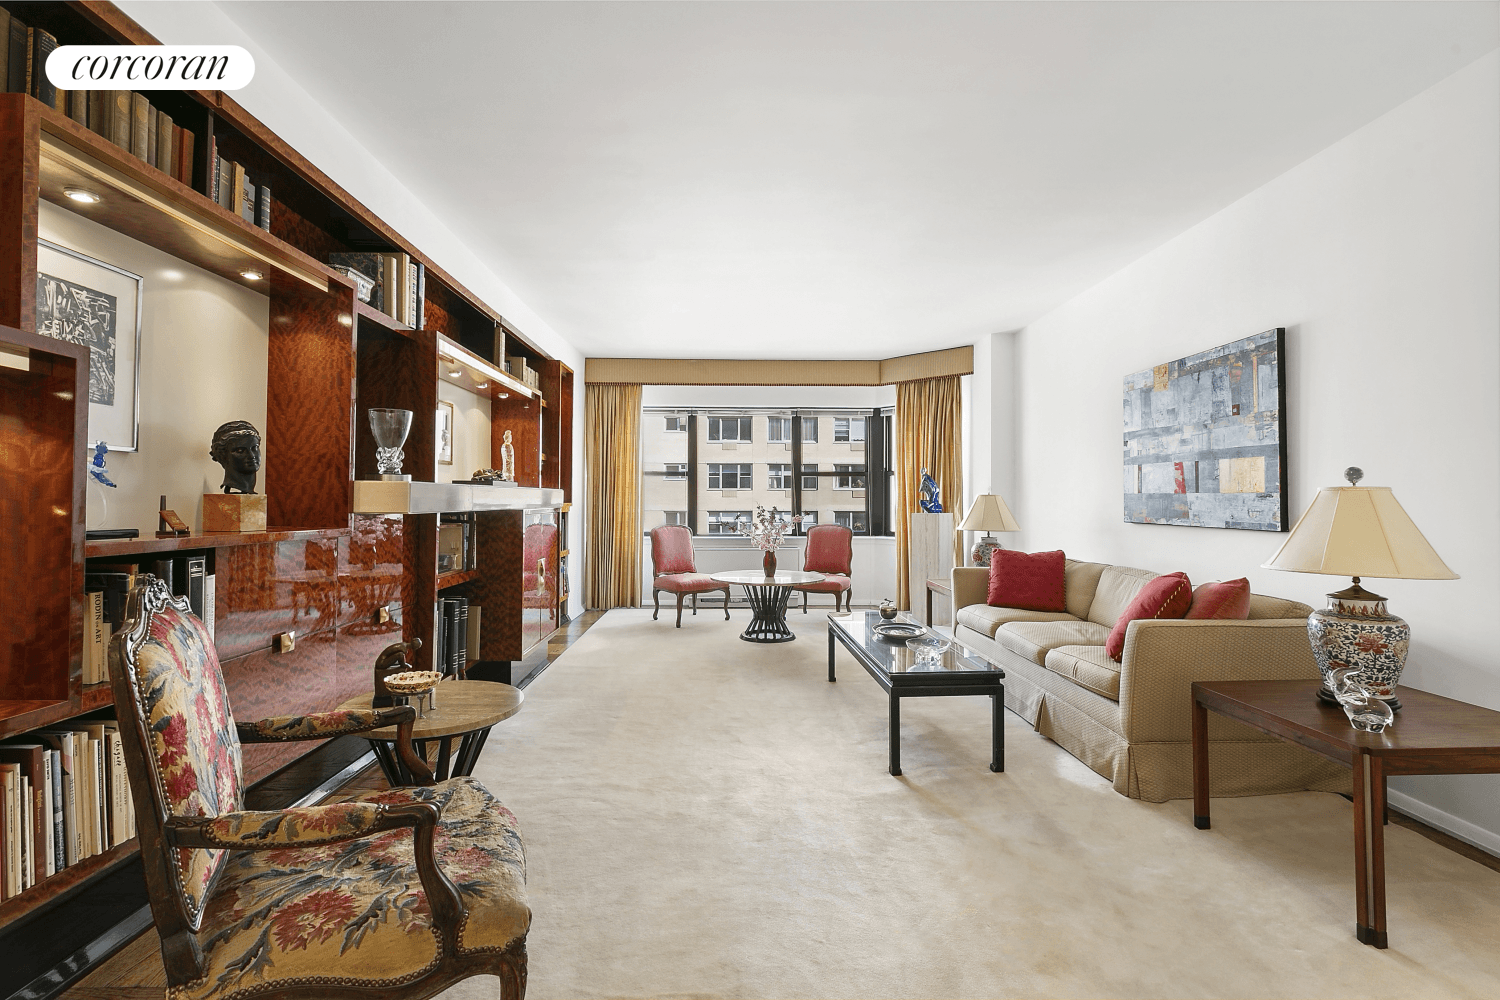 Enjoy the epitome of Classy and Comfortable living on Sutton Place South in this beautiful and gracious classic six apartment with approximately 1, 900 square feet !